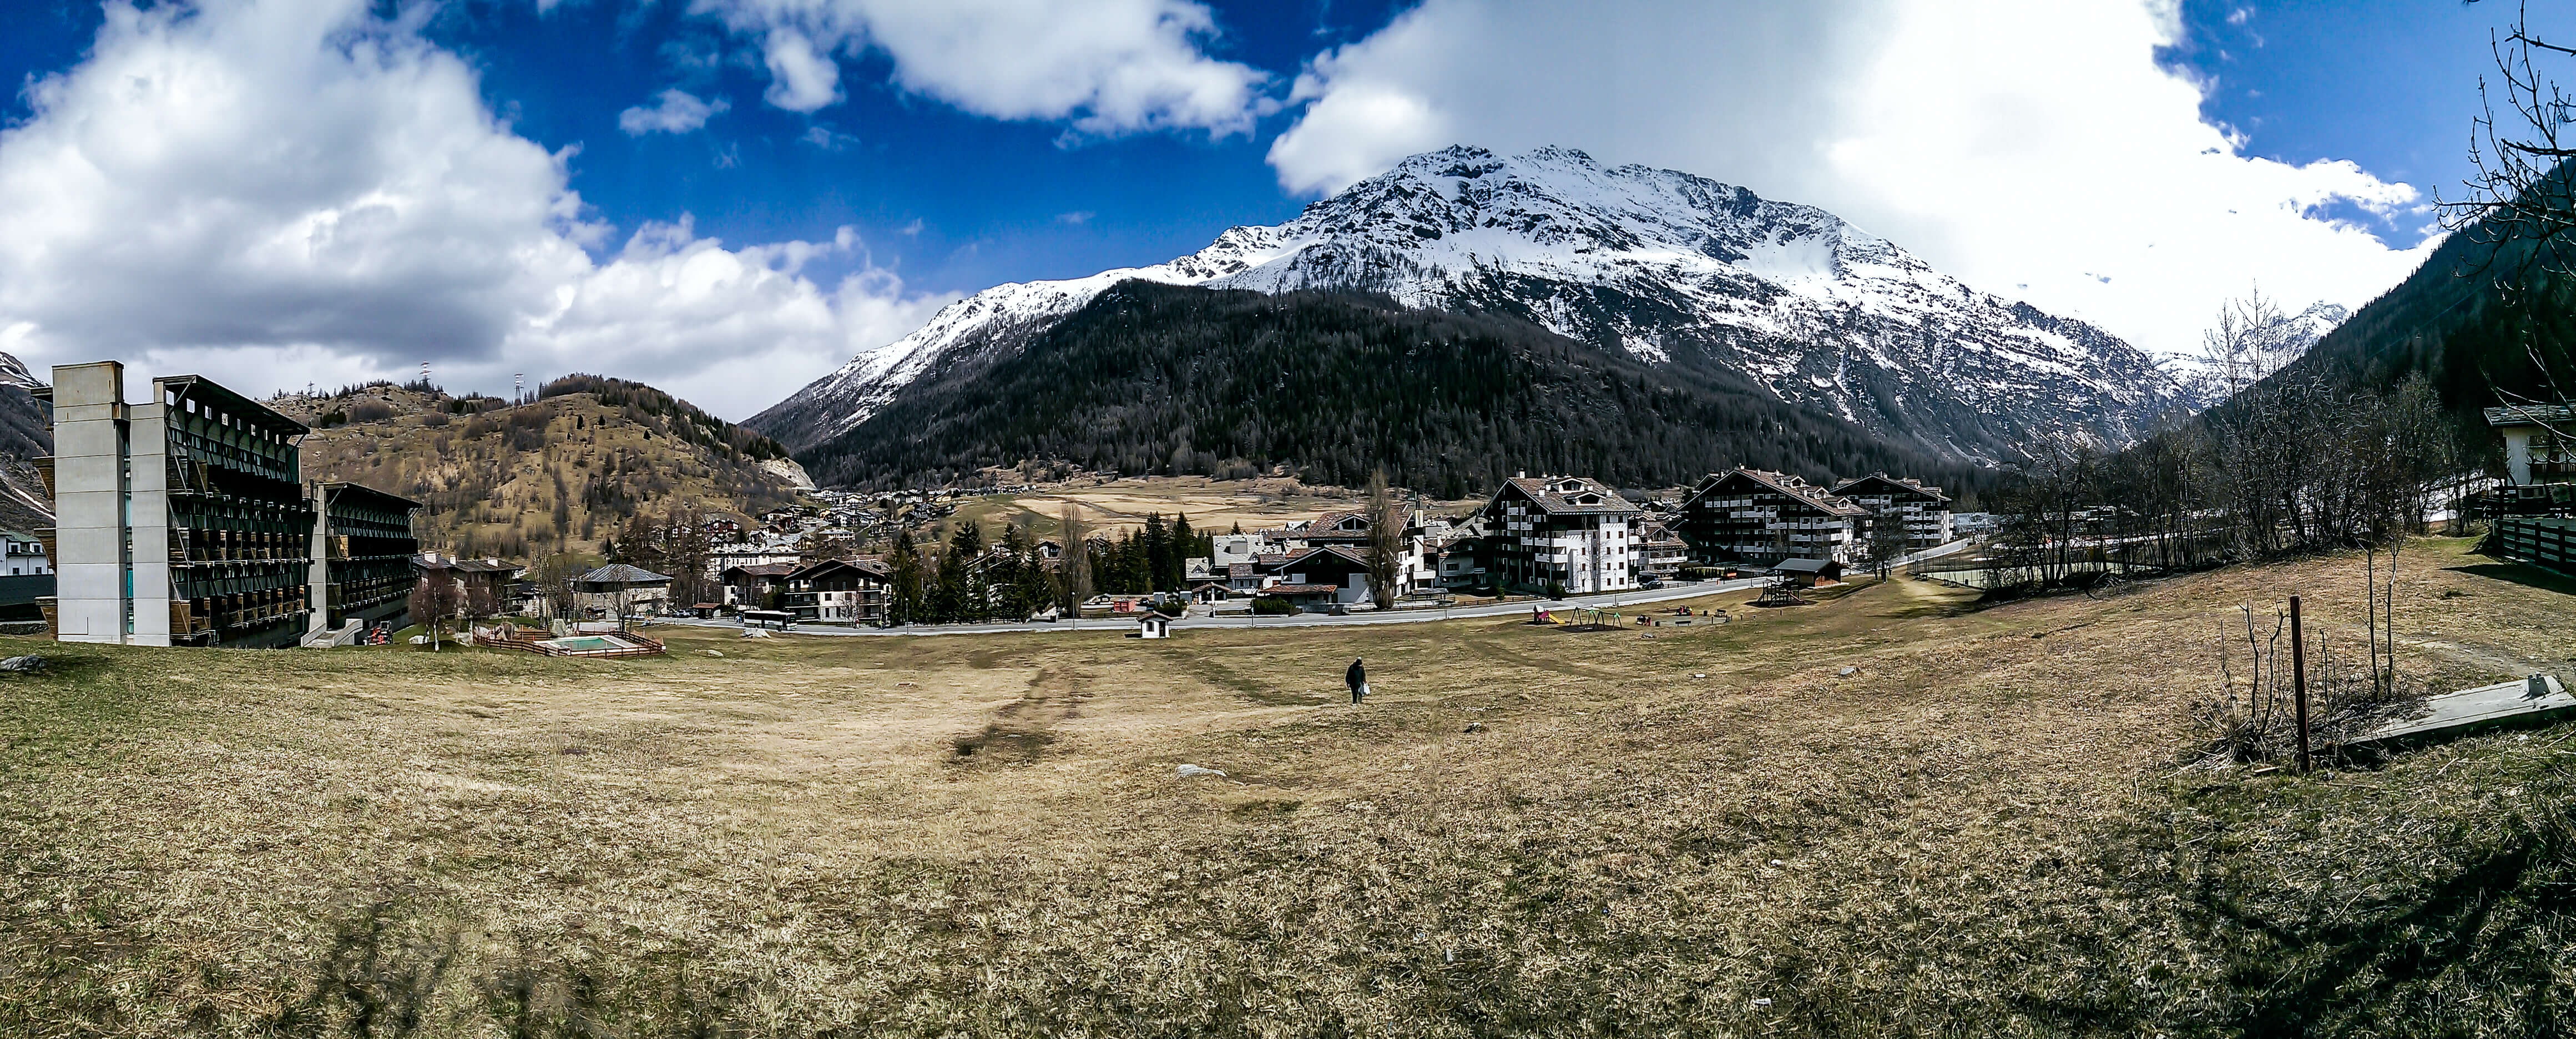 The View of the Planibel Apartments at town level in La Thuile